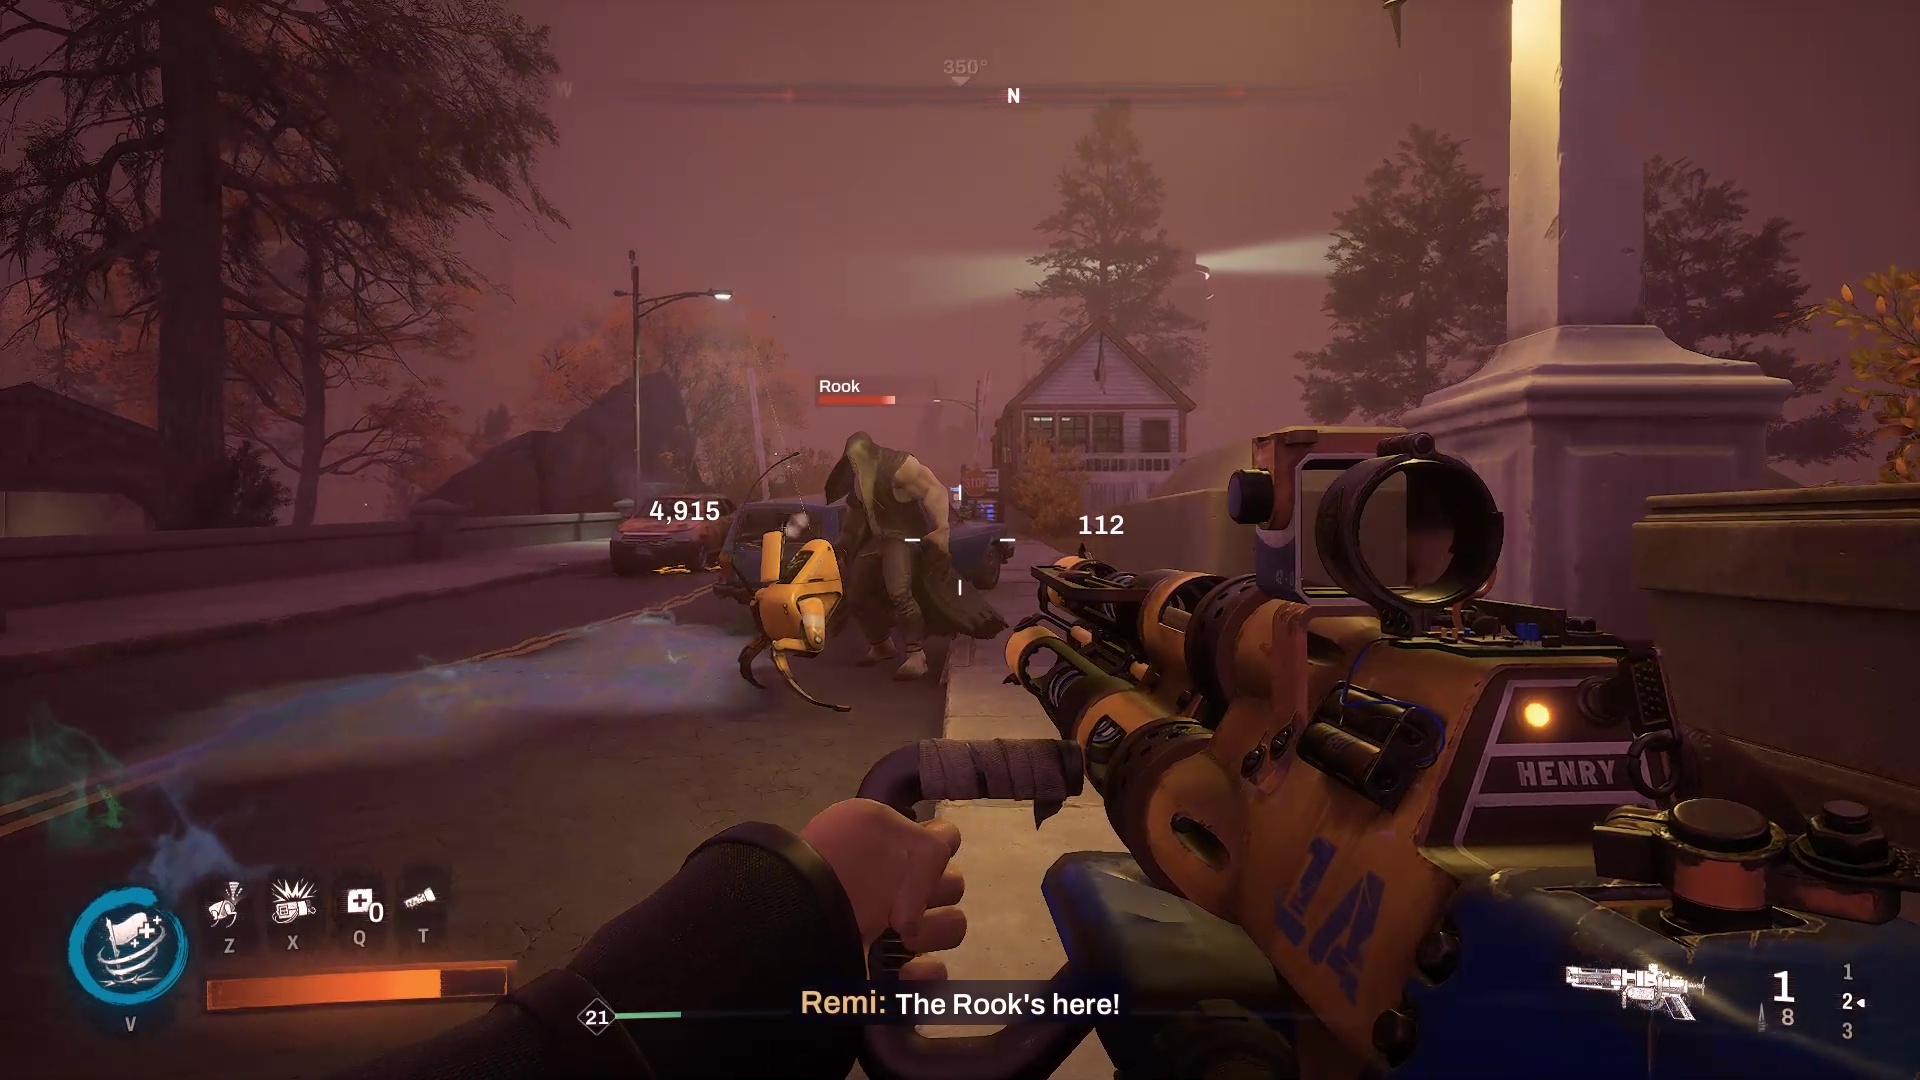 Redfall Gameplay Shows off Intense Battle Against The Rook